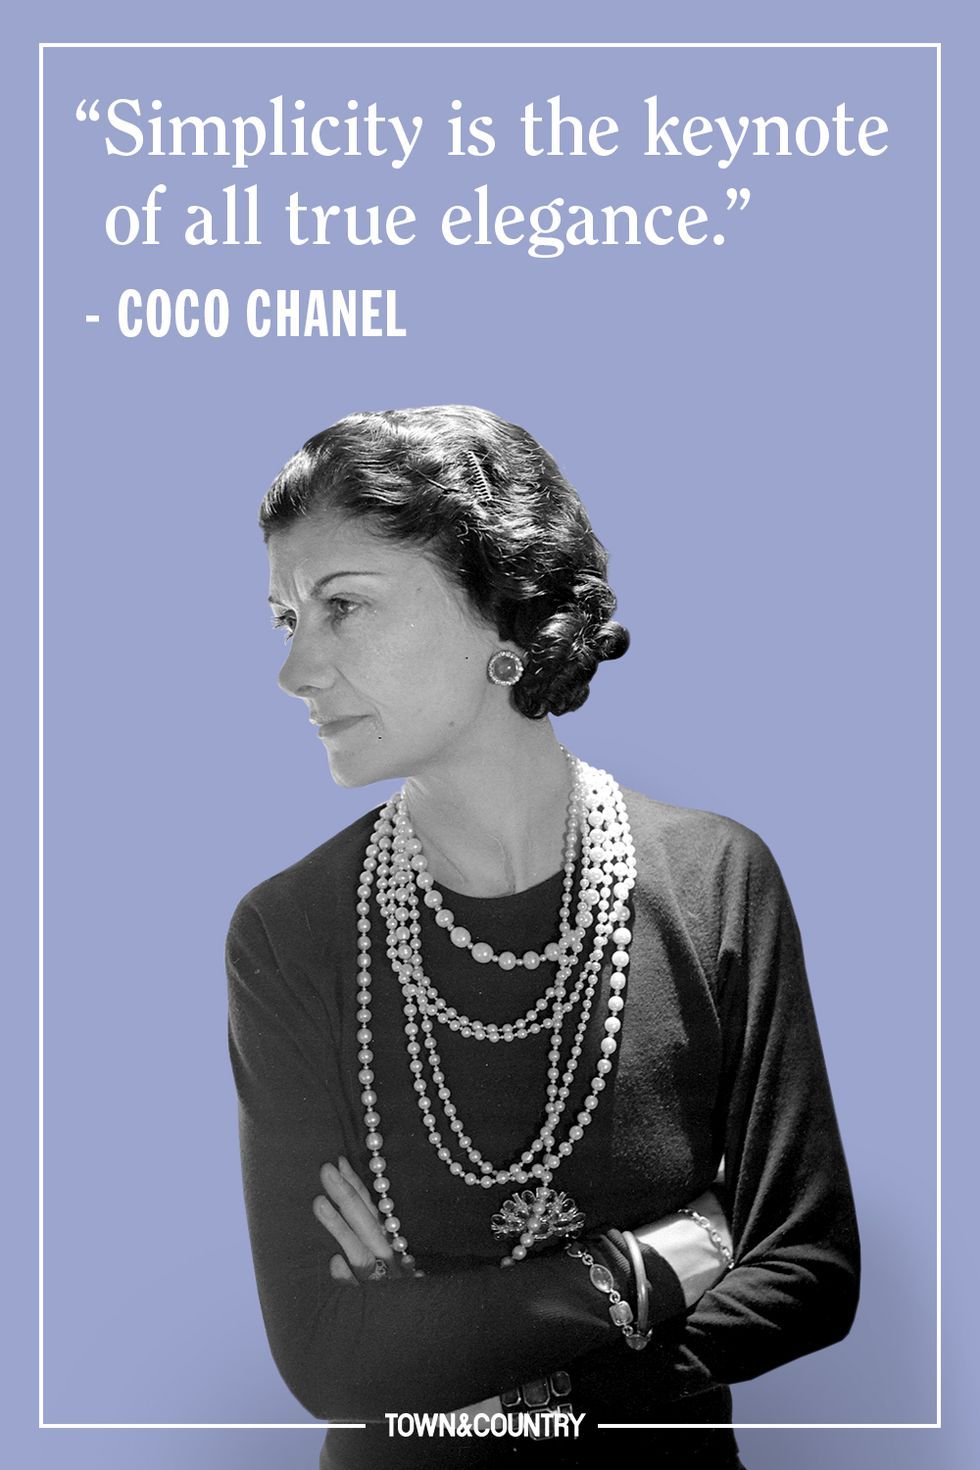 Bibisi Beauty Bar  ωιѕє ωσмαи  call today to book a life changing  appointment 860 3458027    beauty coco cocochanel chanel quotes  women woman beautiful hair cut haircut change 